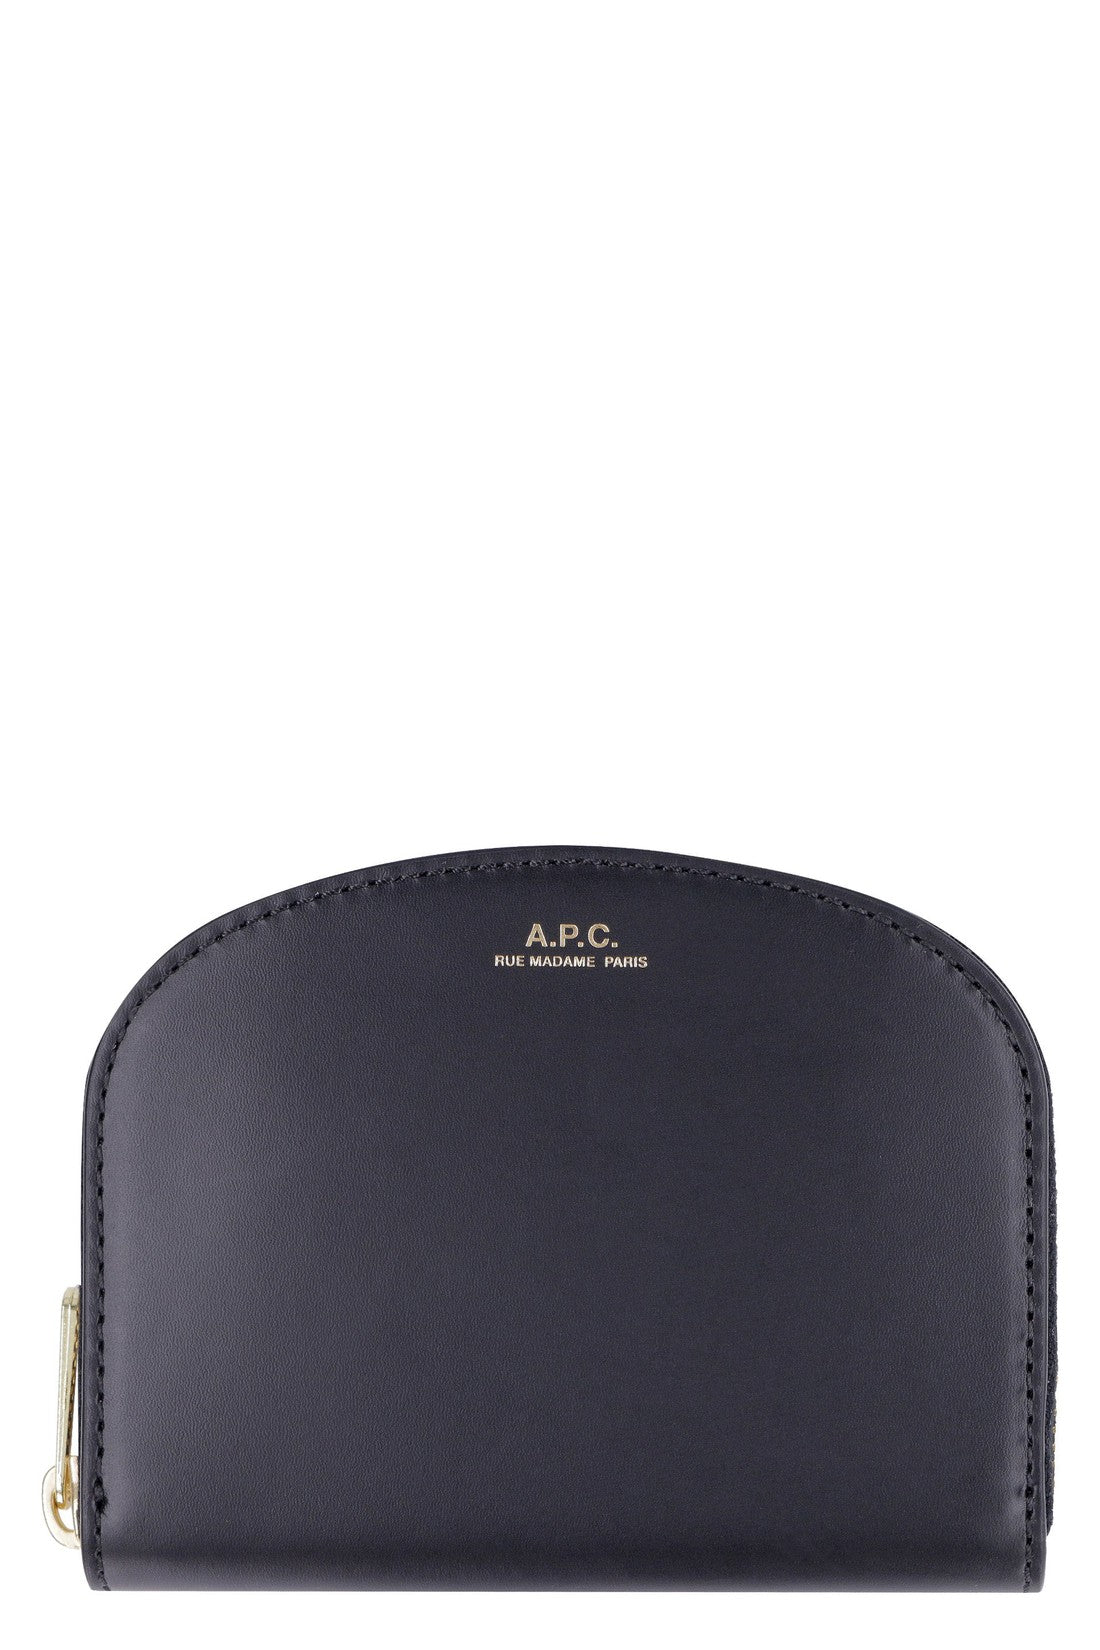 A.P.C.-OUTLET-SALE-Small leather flap-over wallet-ARCHIVIST